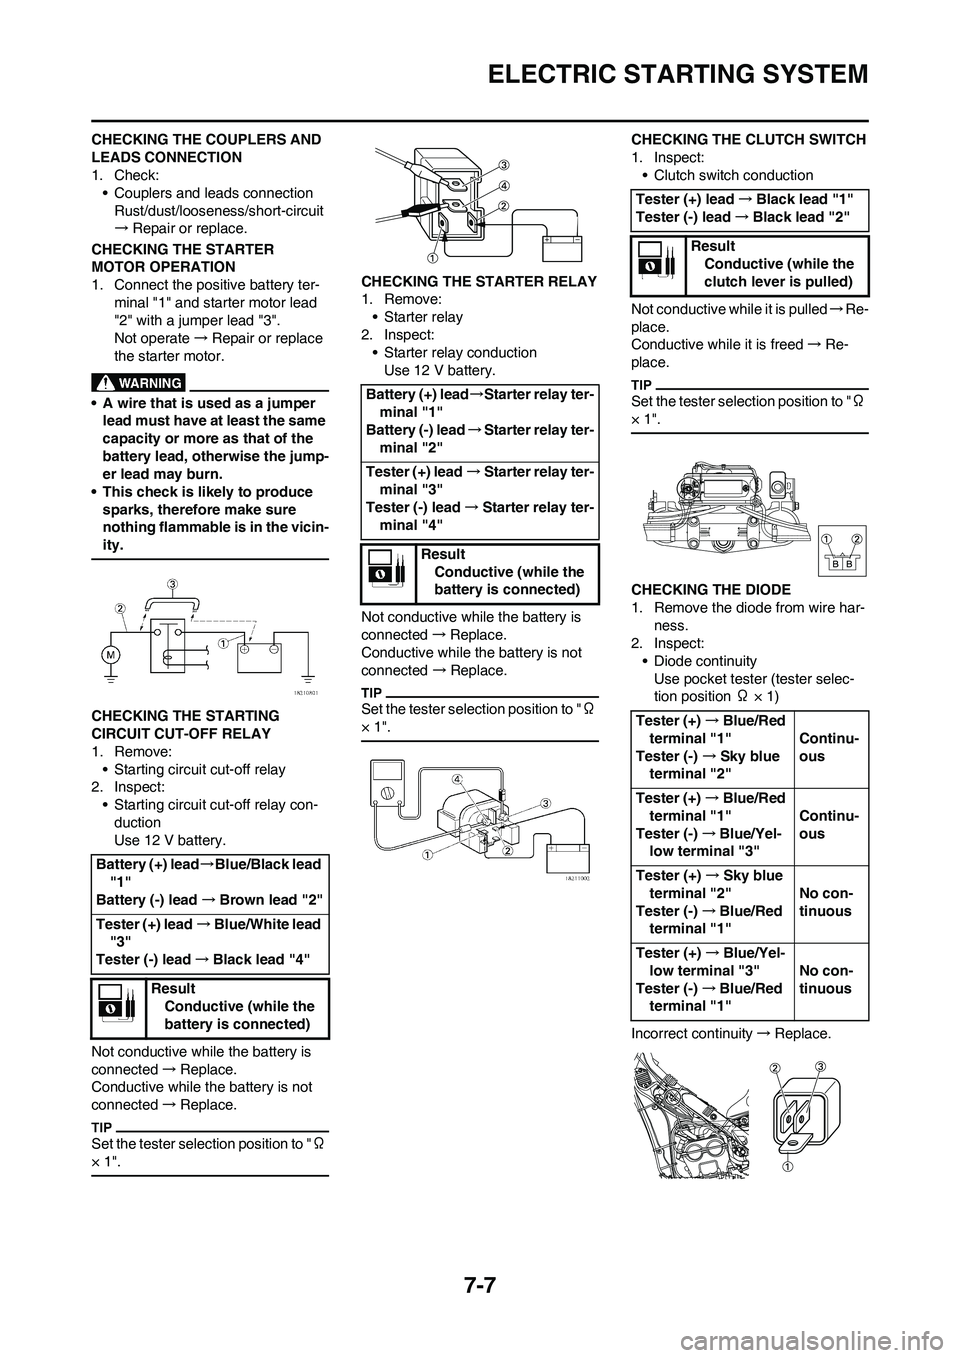 YAMAHA WR 450F 2011  Owners Manual 7-7
ELECTRIC STARTING SYSTEM
CHECKING THE COUPLERS AND 
LEADS CONNECTION
1. Check:
• Couplers and leads connection
Rust/dust/looseness/short-circuit
→Repair or replace.
CHECKING THE STARTER 
MOTOR